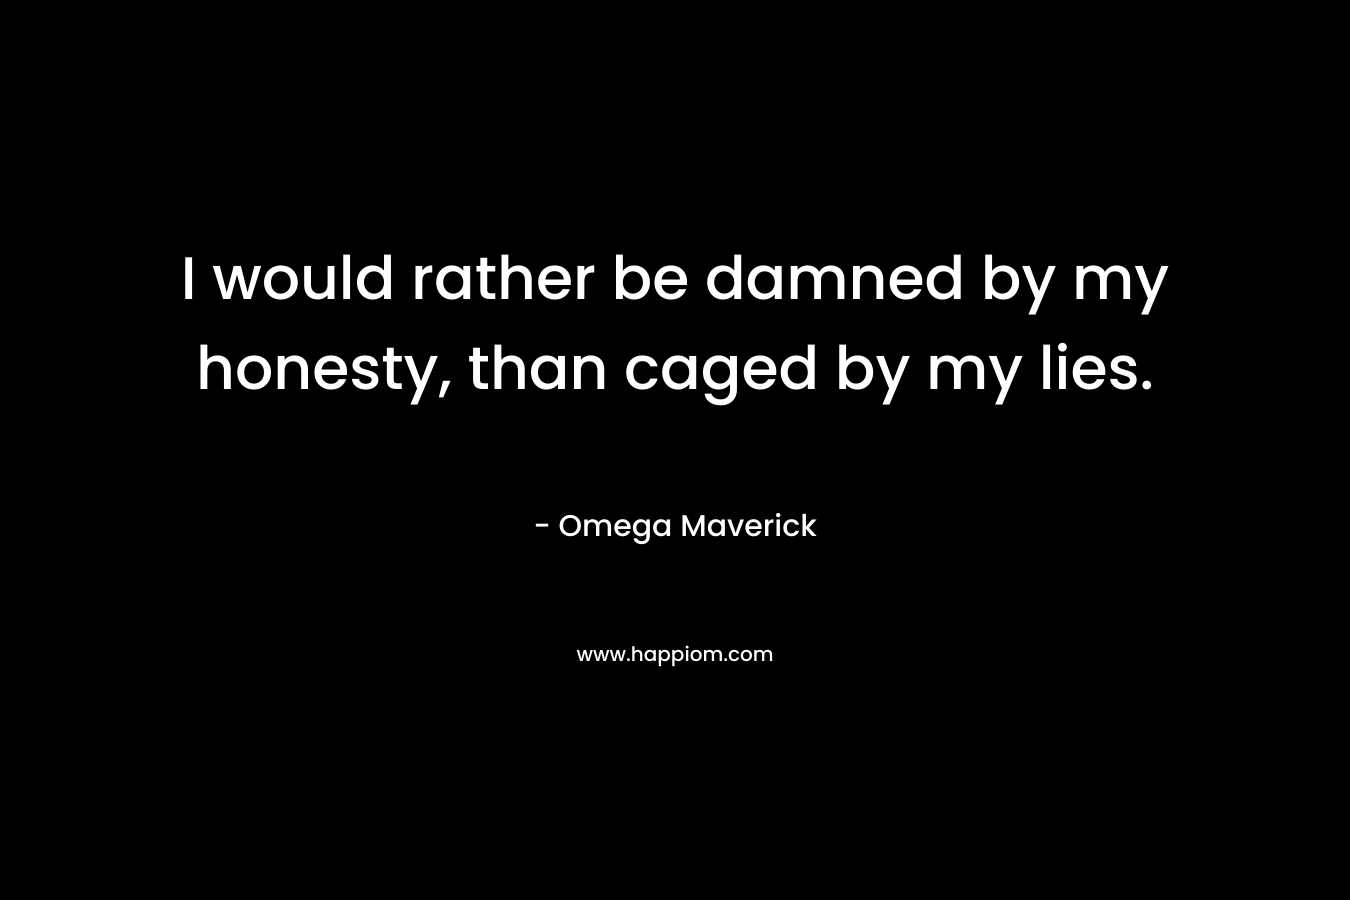 I would rather be damned by my honesty, than caged by my lies.